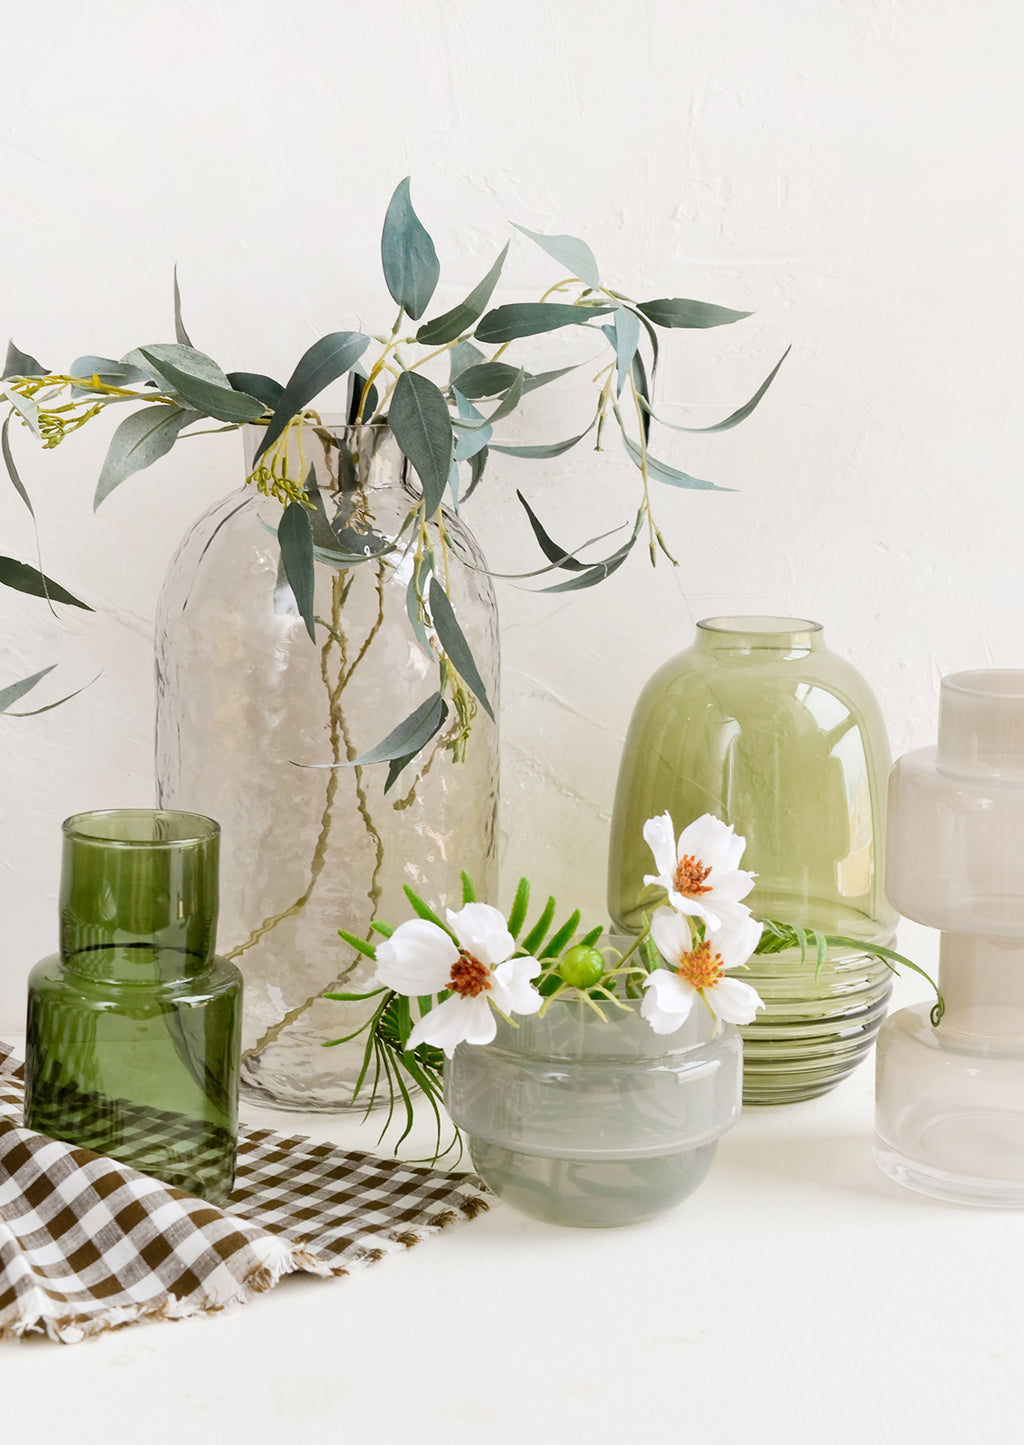 5: An assortment of decorative vases in green and grey glass.